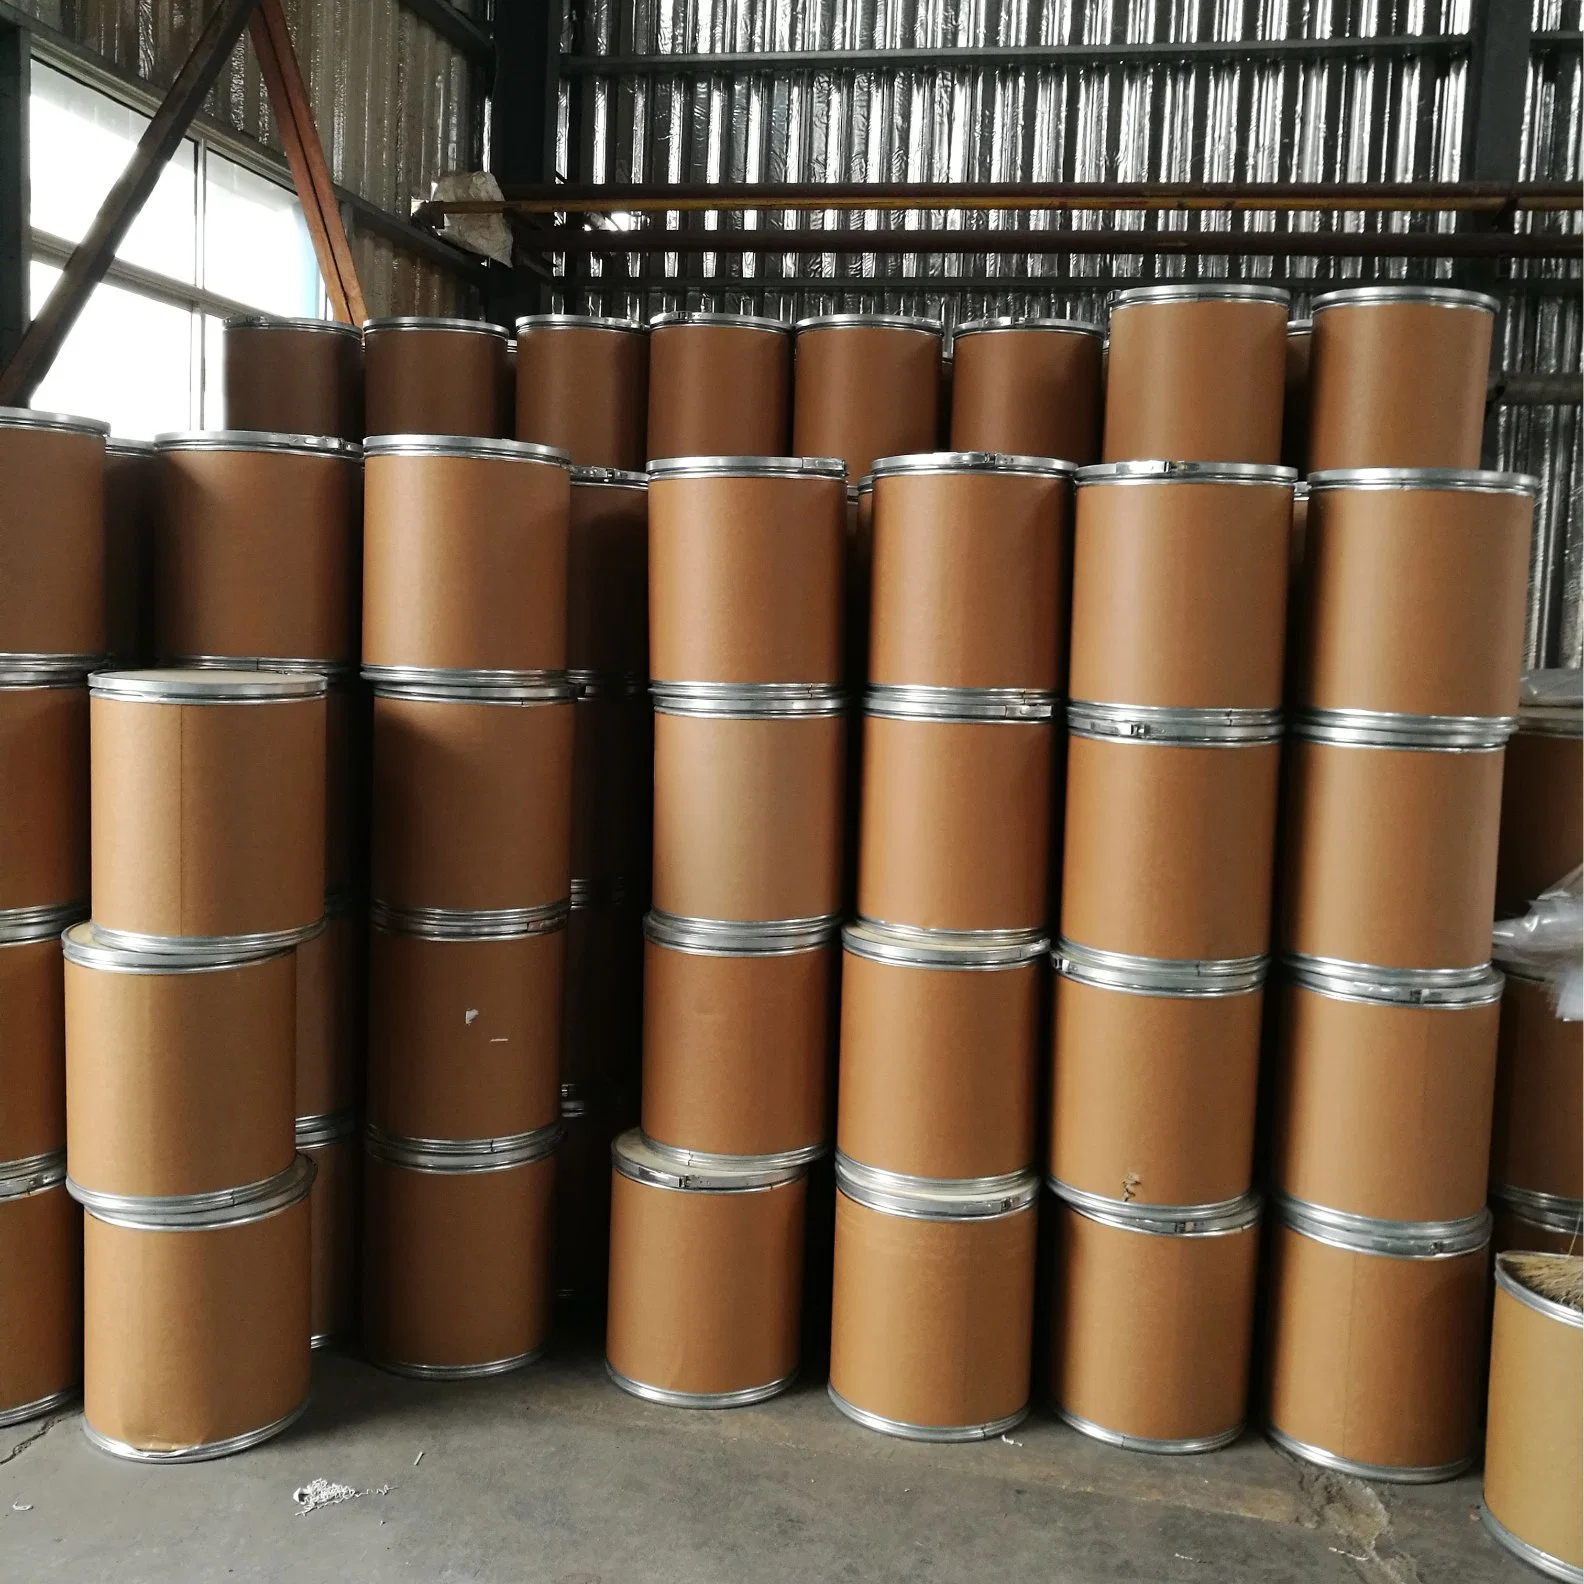 Supply High Purity Titanium Dioxide CAS 1317-70-0 in Stock